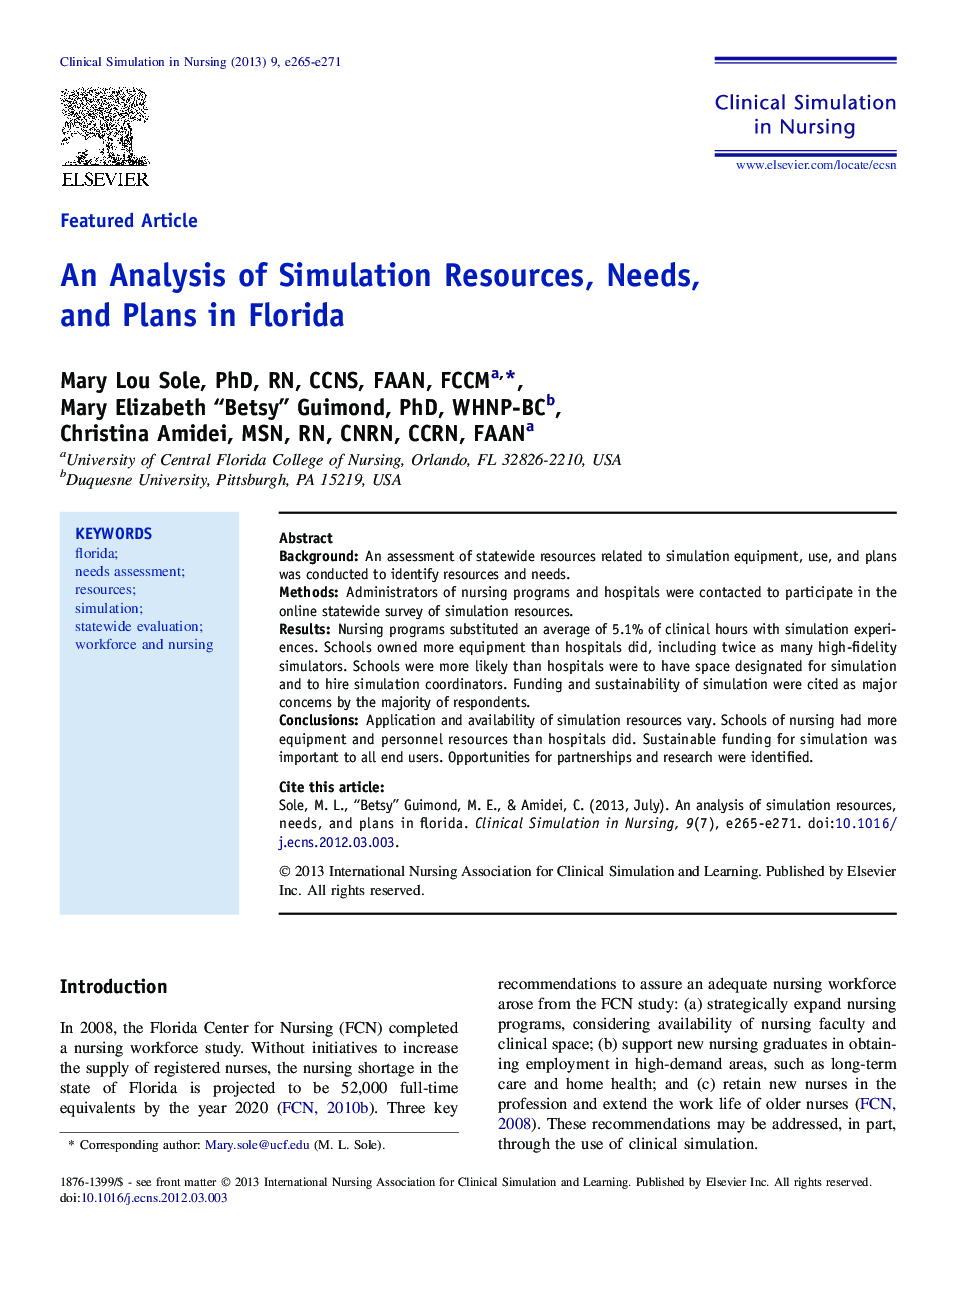 An Analysis of Simulation Resources, Needs, and Plans in Florida